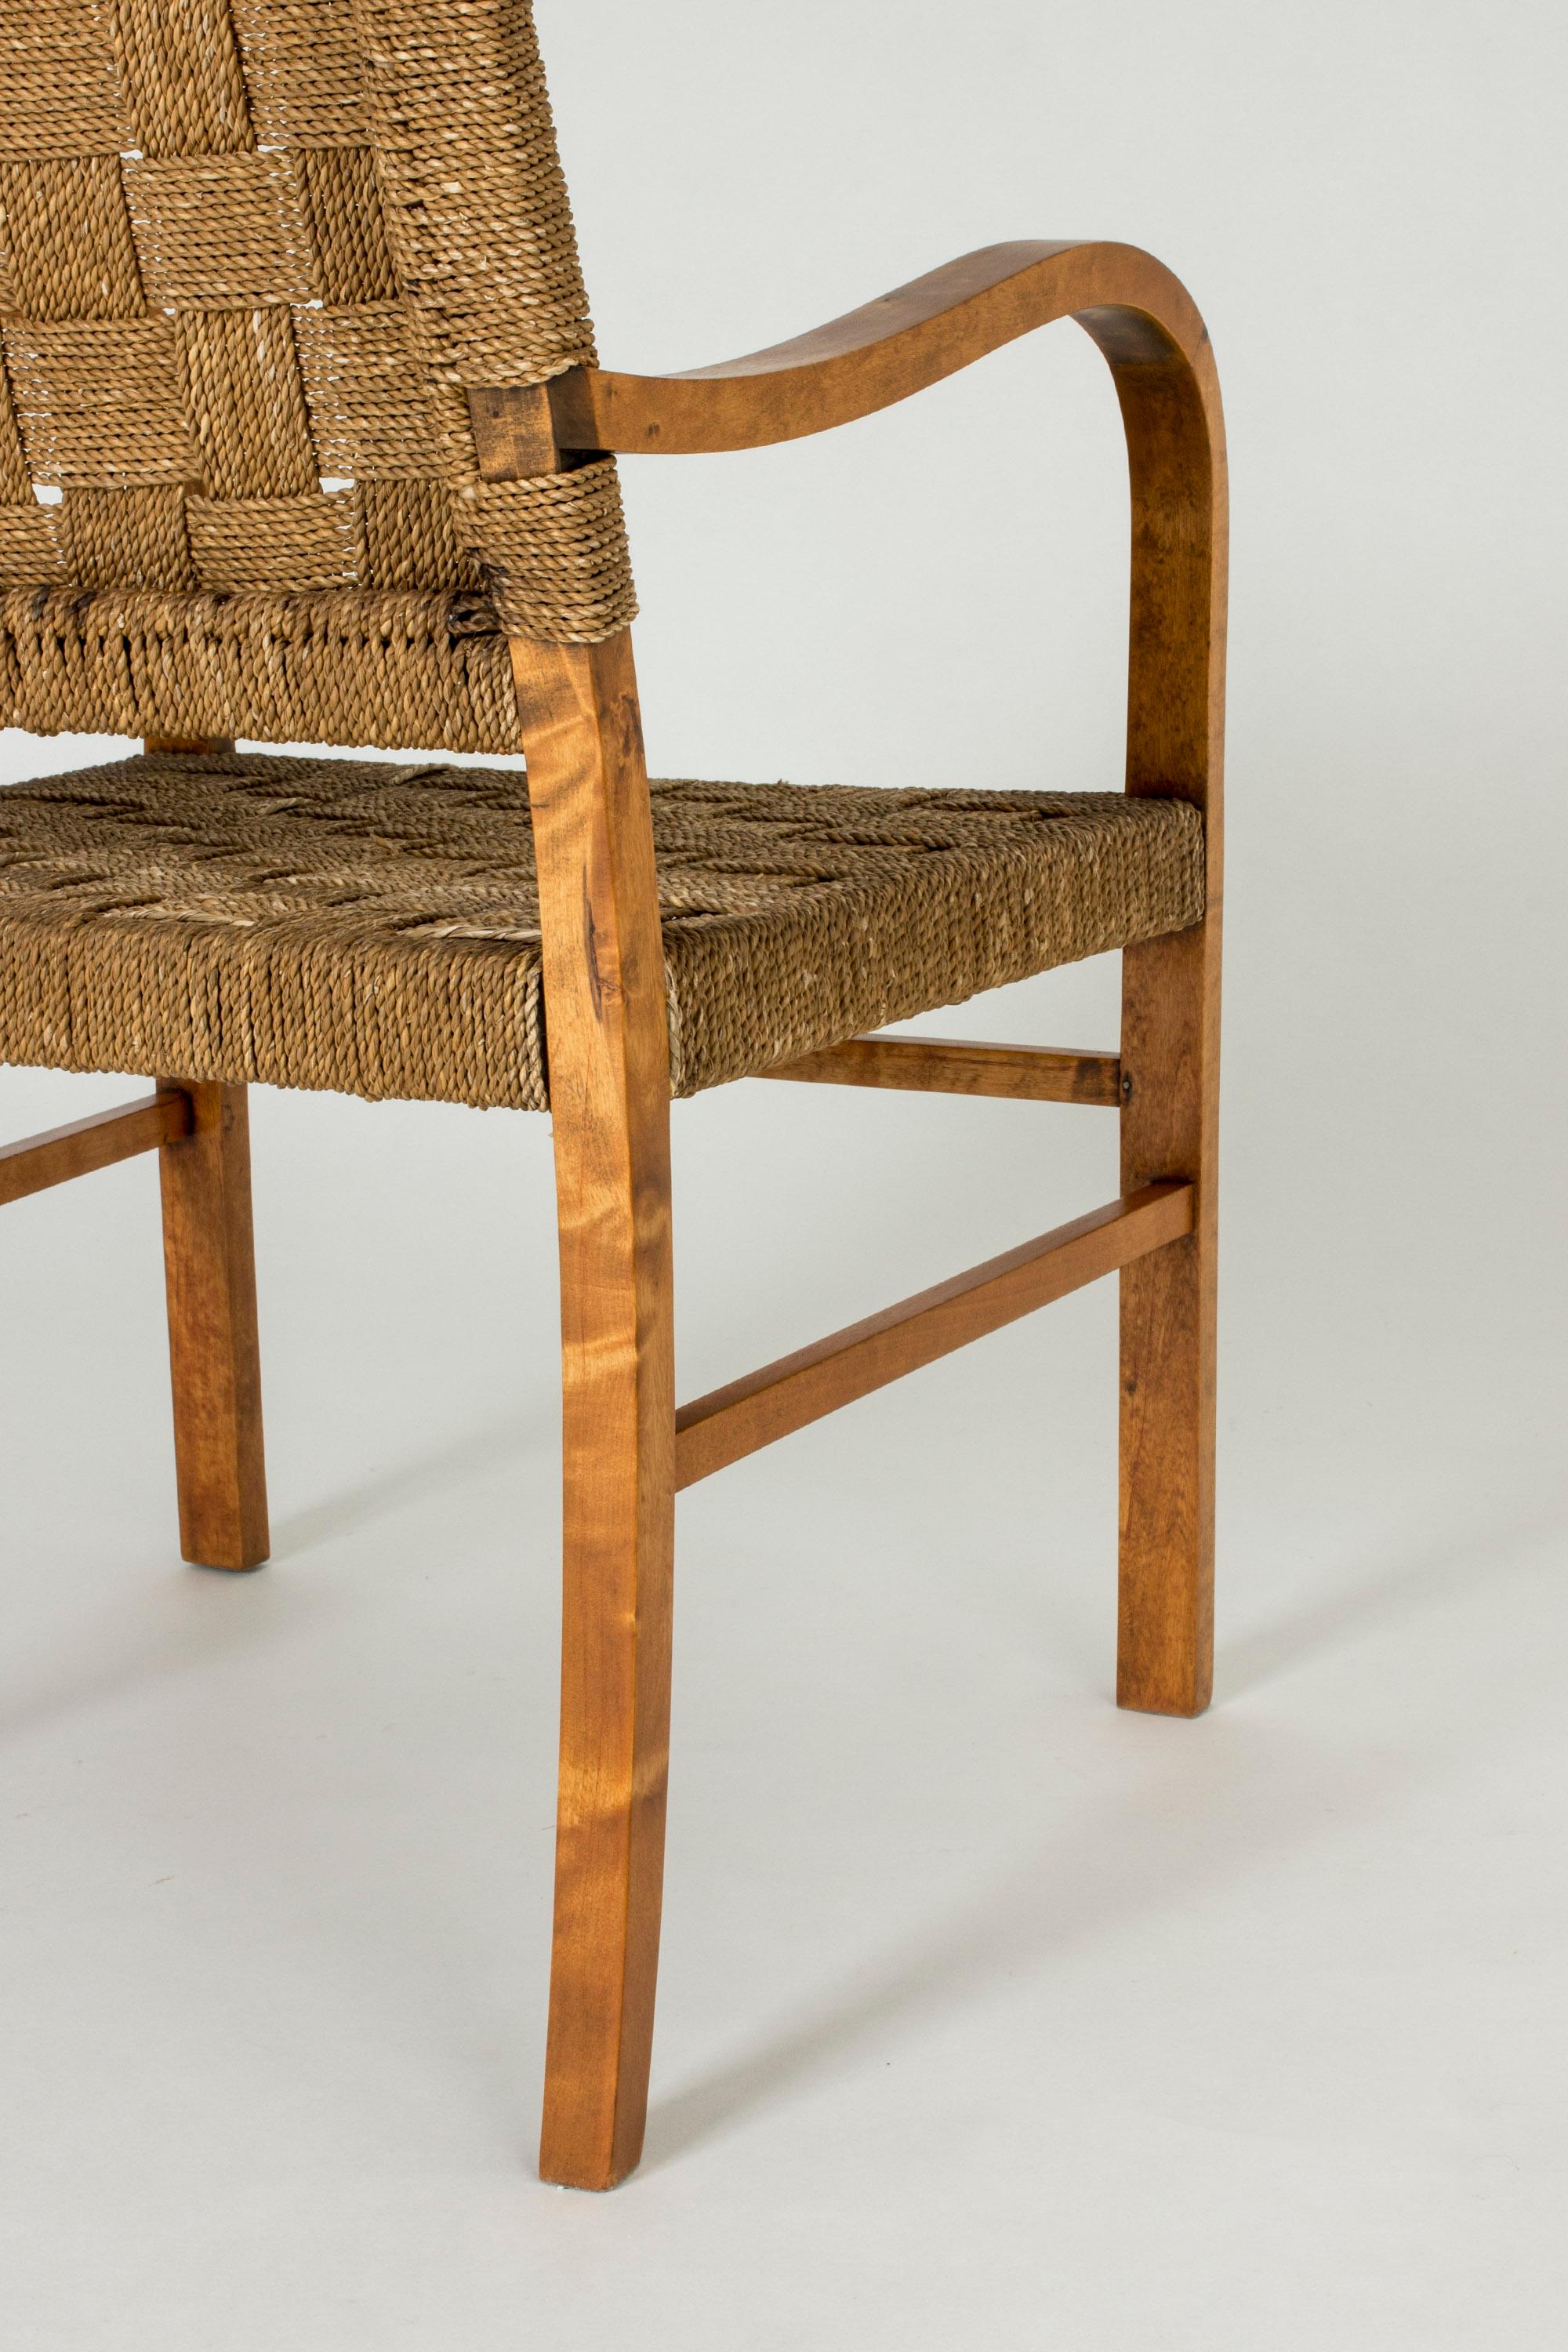 Functionalist Armchair by Axel Larsson for Bodafors, Sweden, 1930s 1